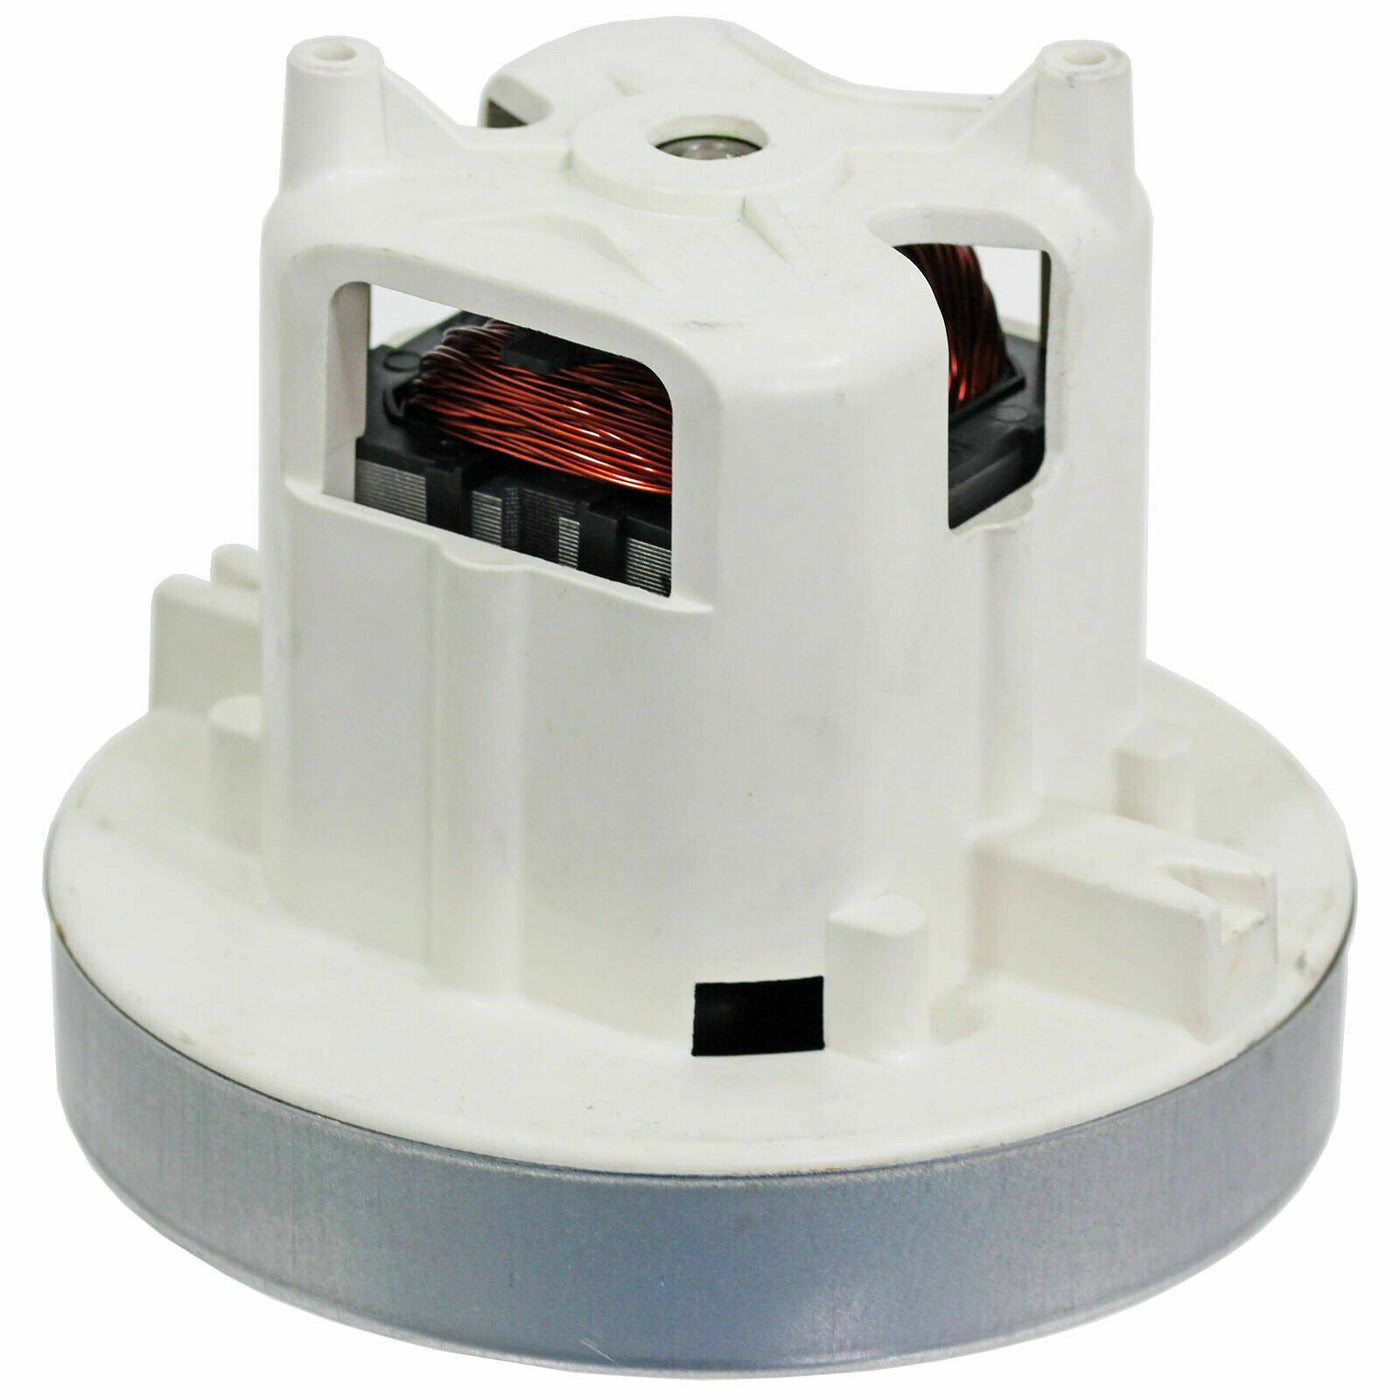 Miele C1 canister - Motor